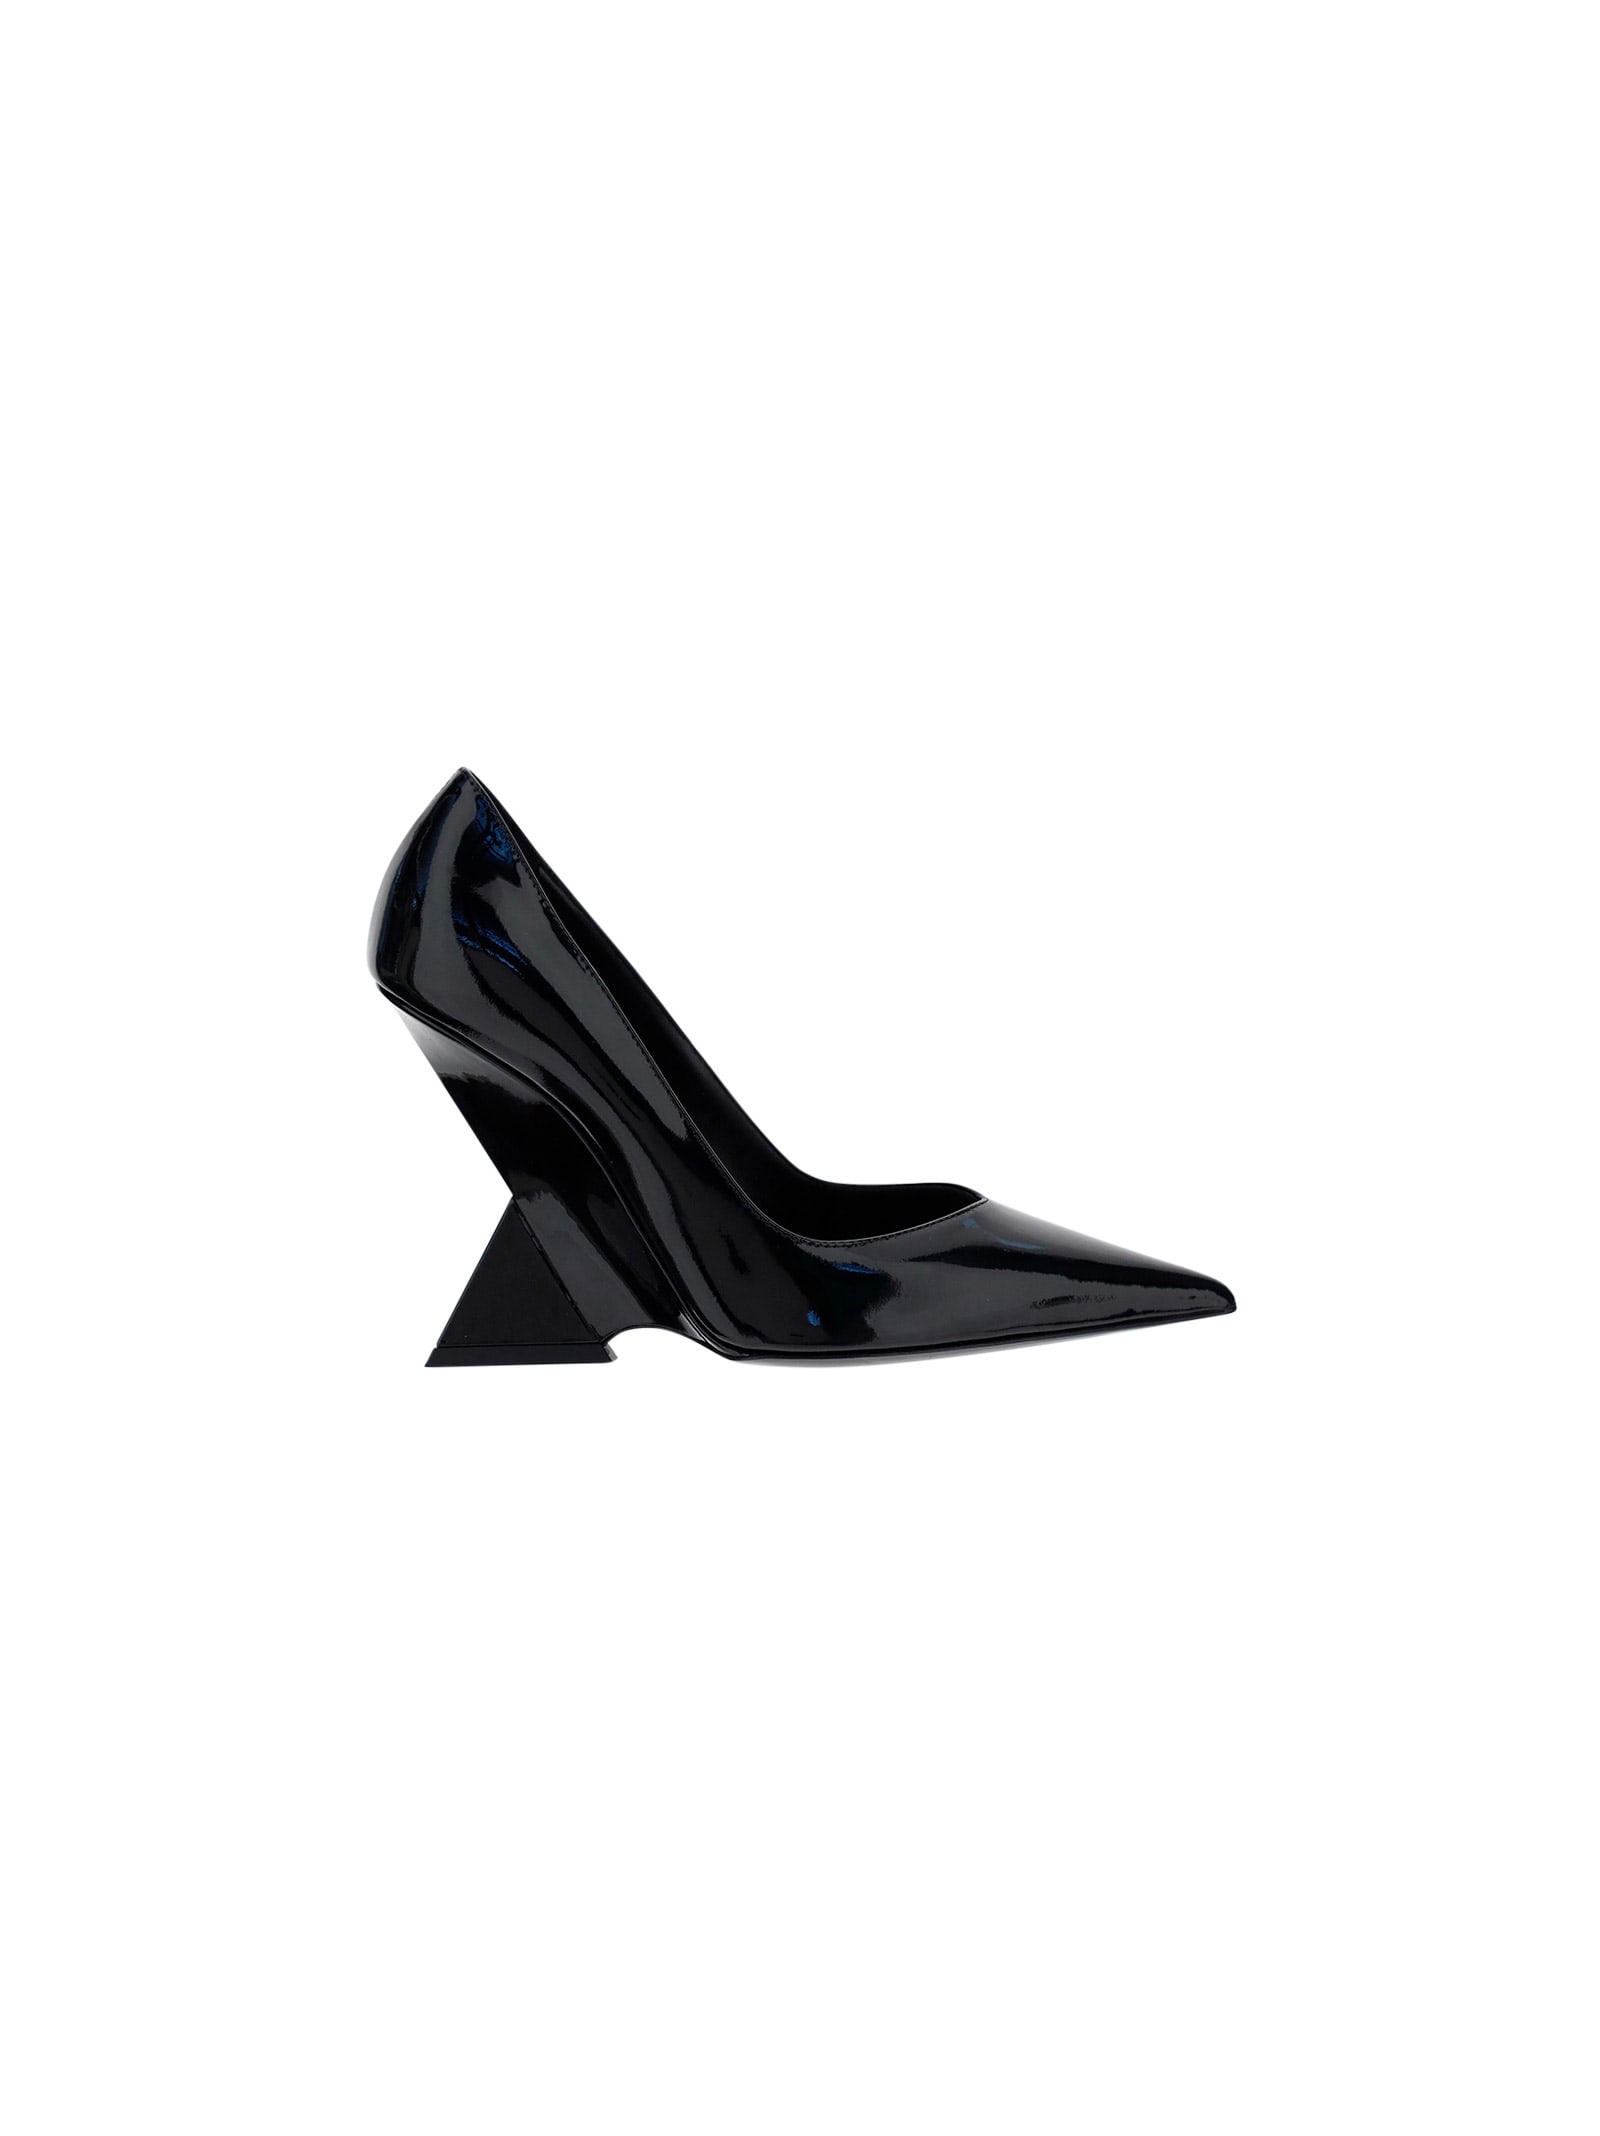 The Attico Cheope Pump Shoes